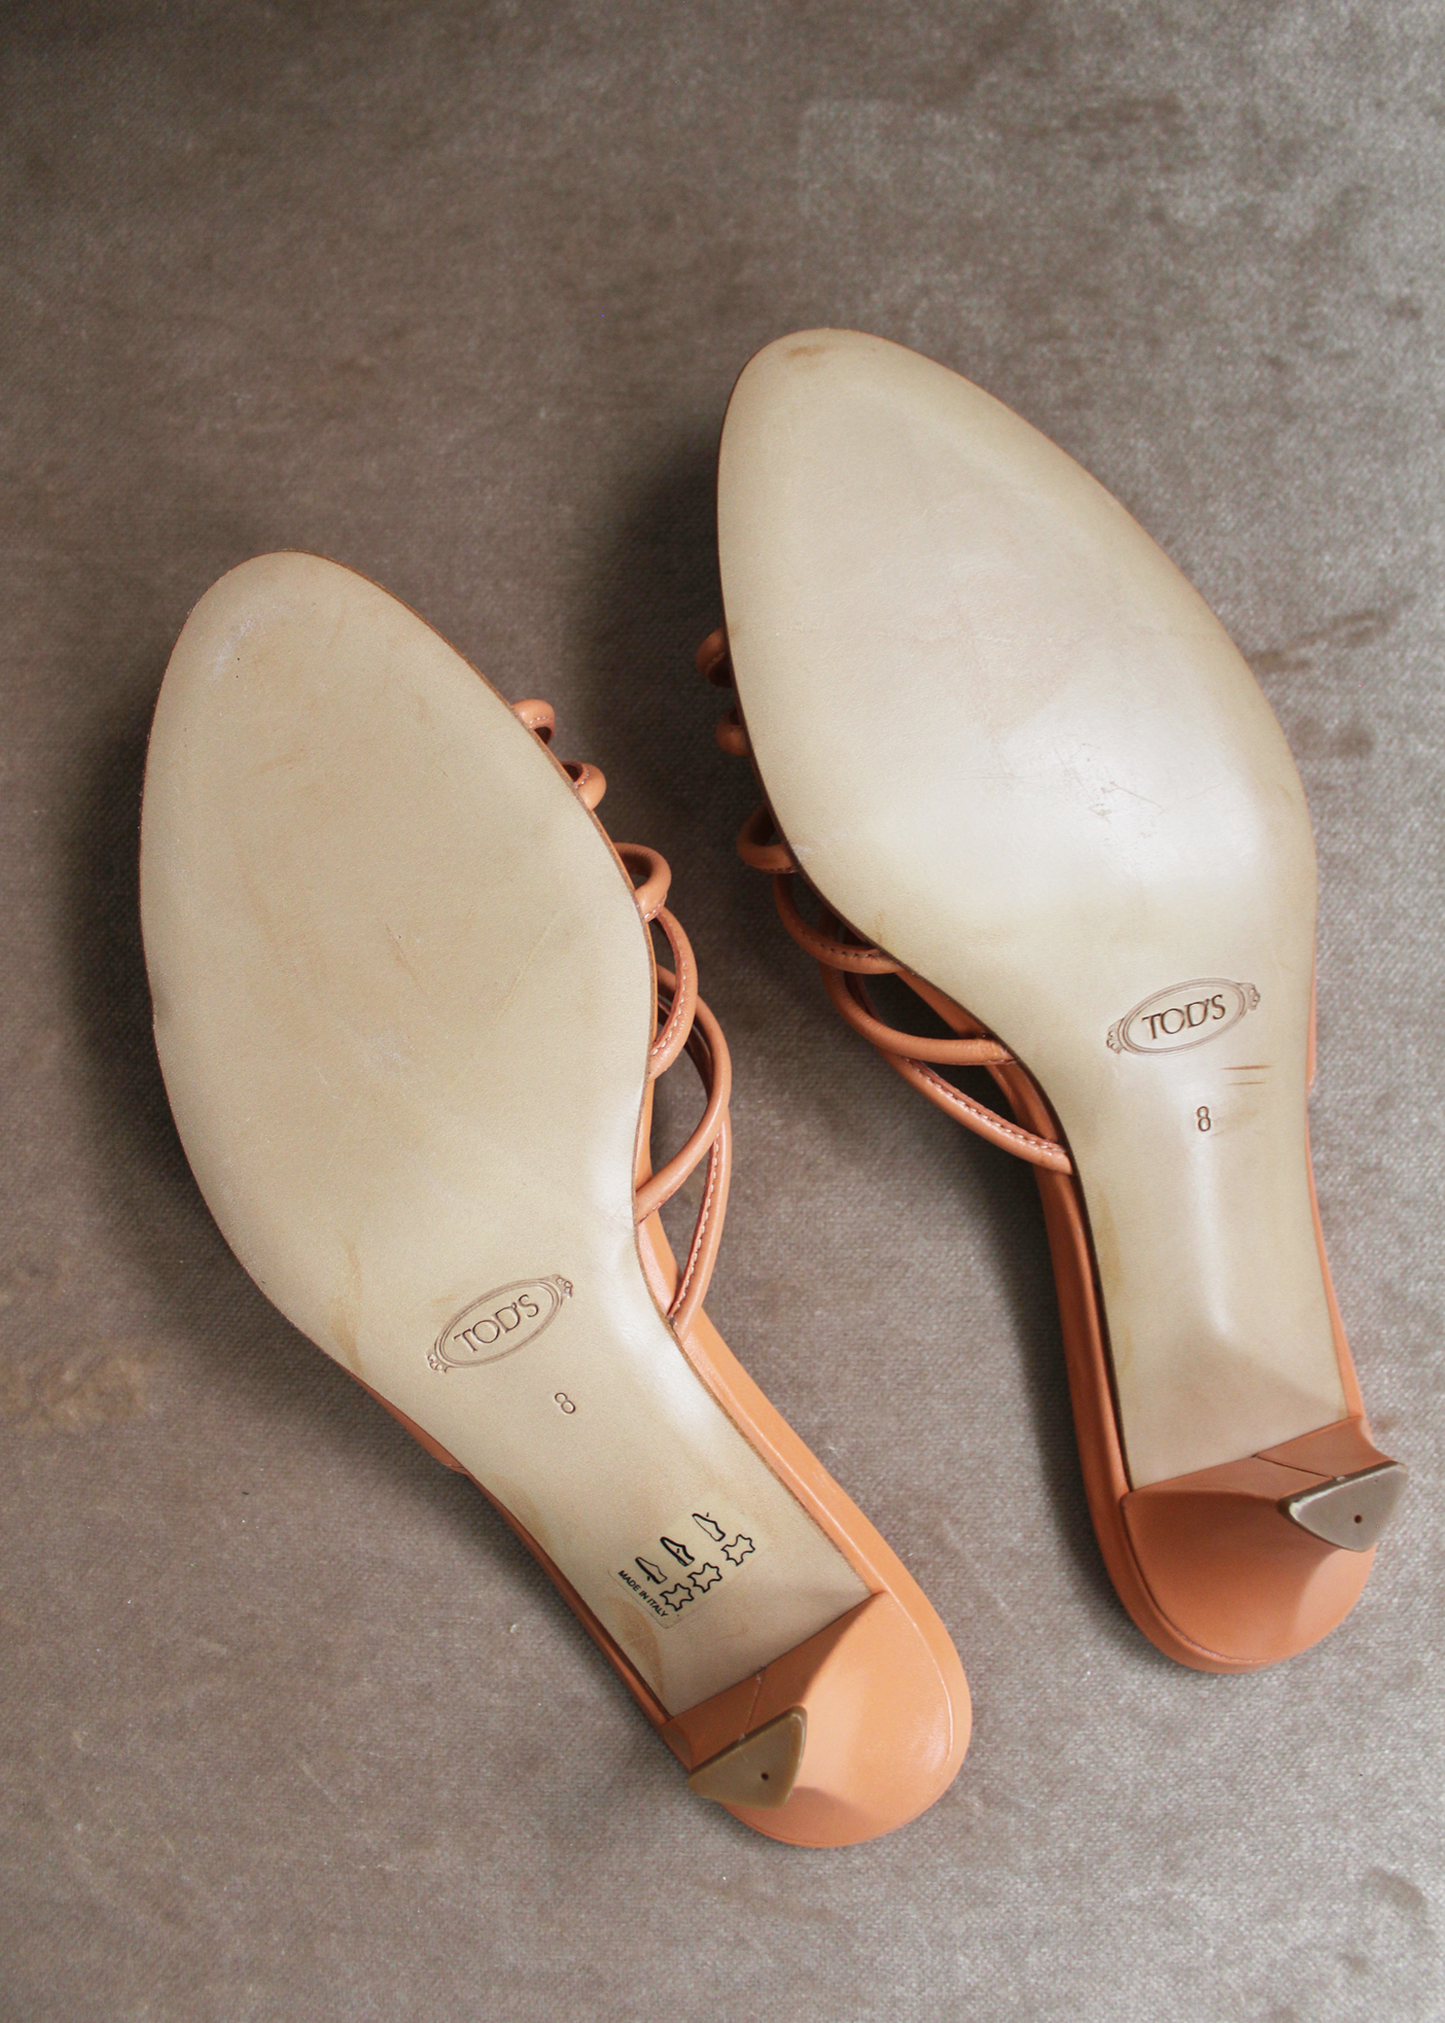 Tod's 2000s Kitten Heel in Creamsicle Leather- Size 8